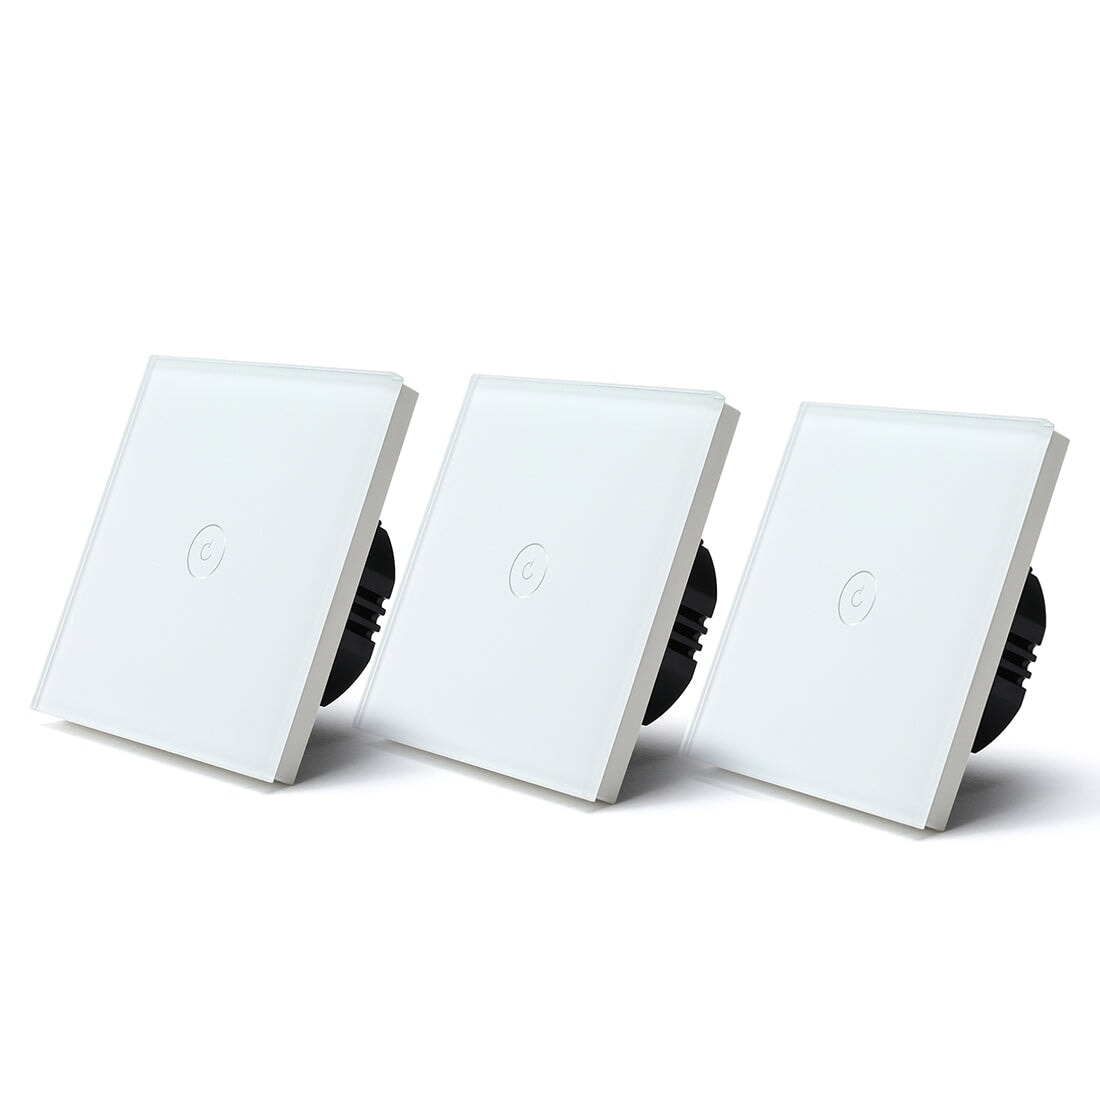 Bseed Smart Wifi Touch Switch 1 Gang 1/2/3 Way Wall Plates & Covers Bseedswitch White 3Pcs/Pack 